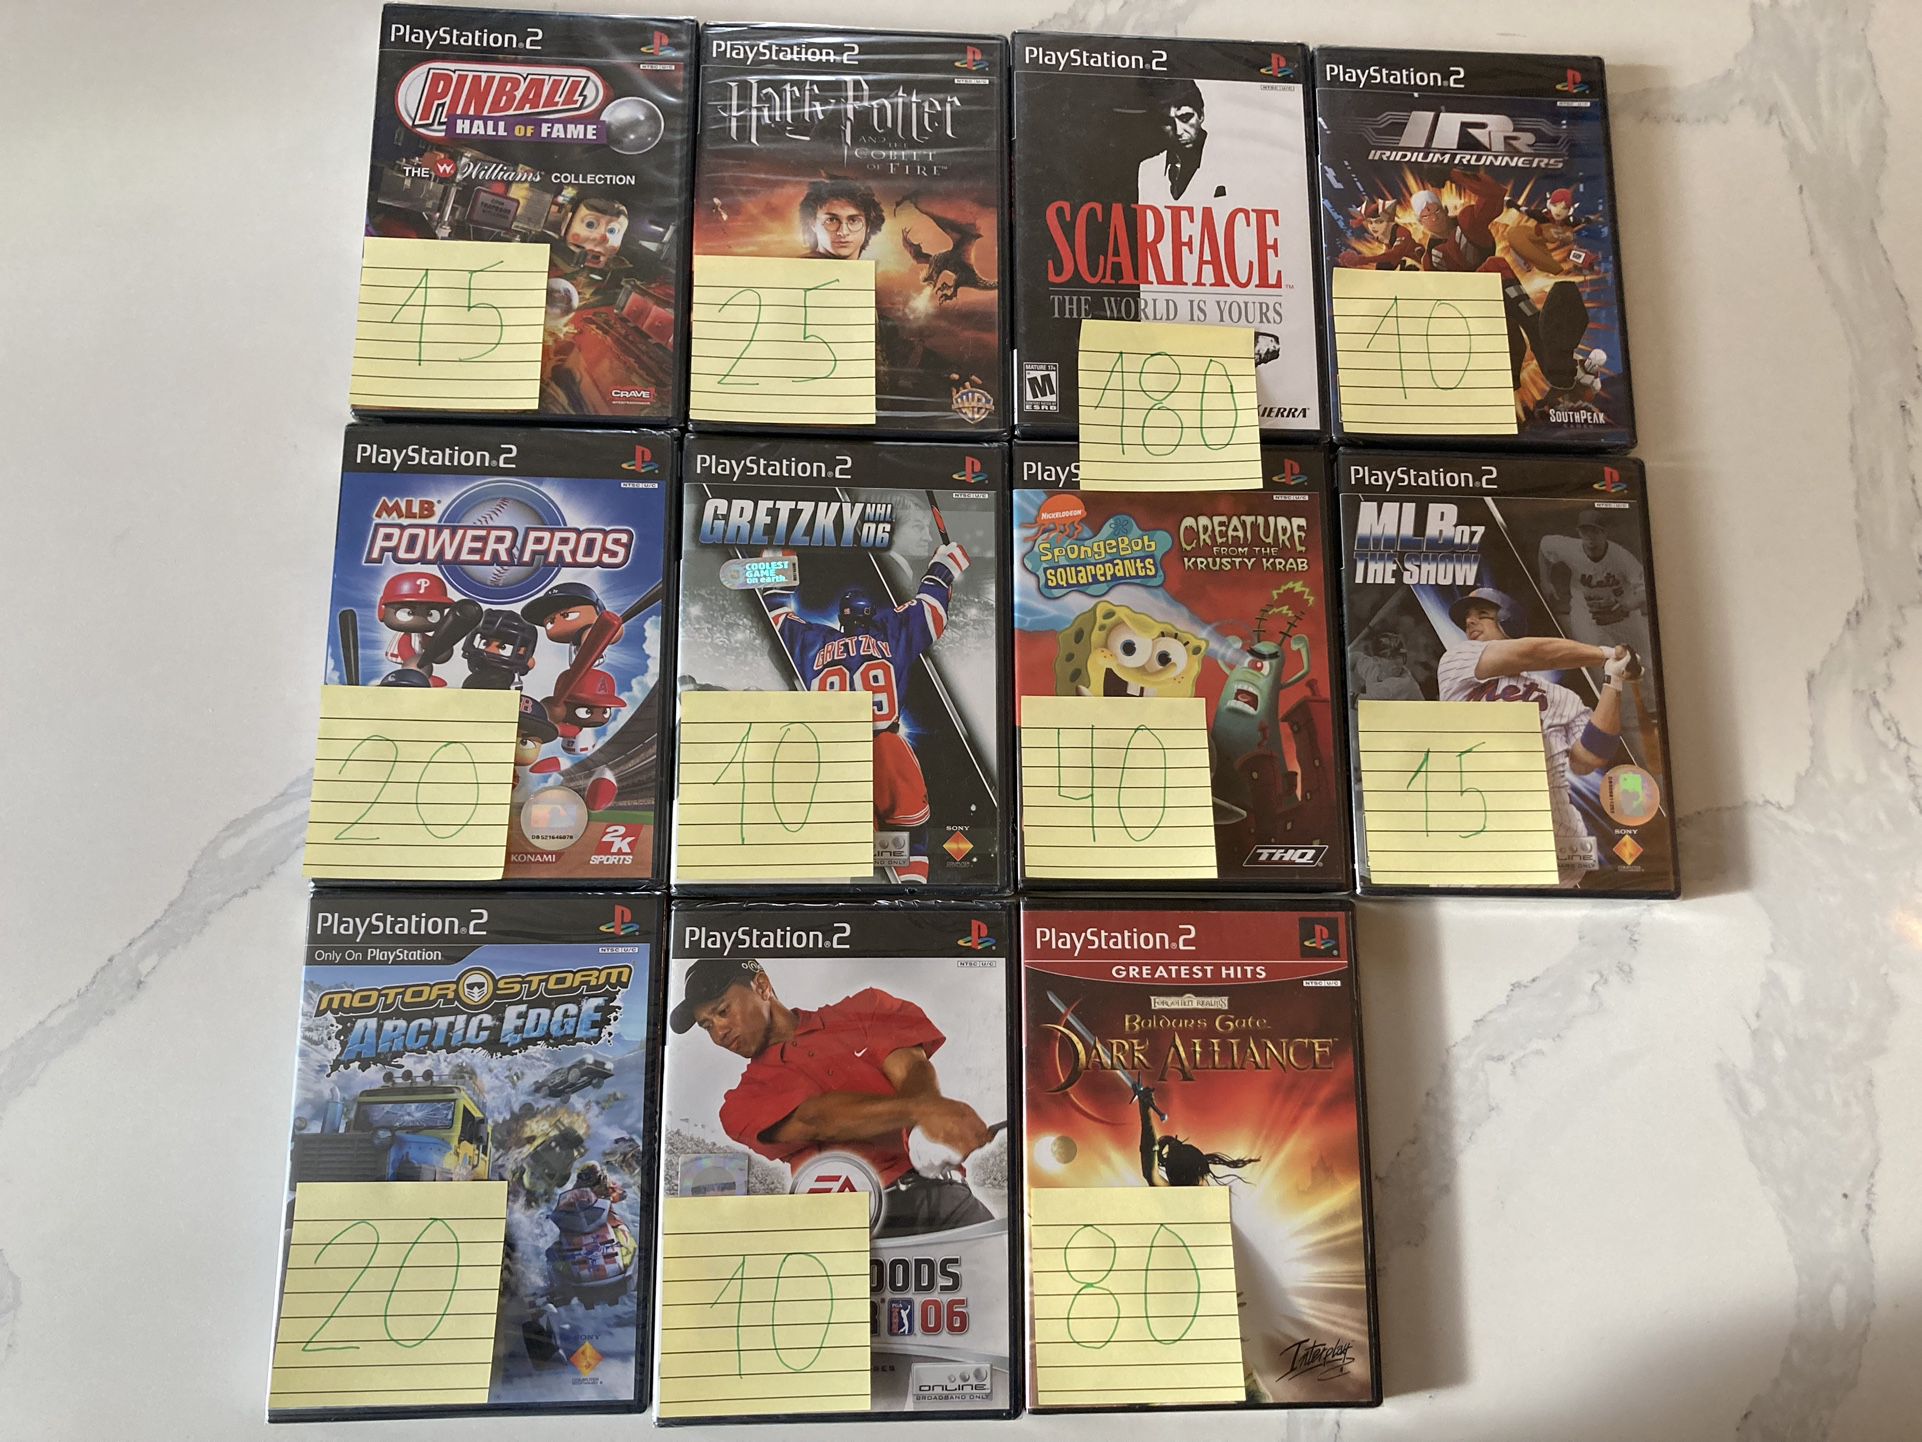 PlayStation2 PS2 Brand New Sealed Games Massage Me For More Info Price On Stickers Thx Some Of The Games Scarface,Spongebob,Dark Alliance,Harry Potter